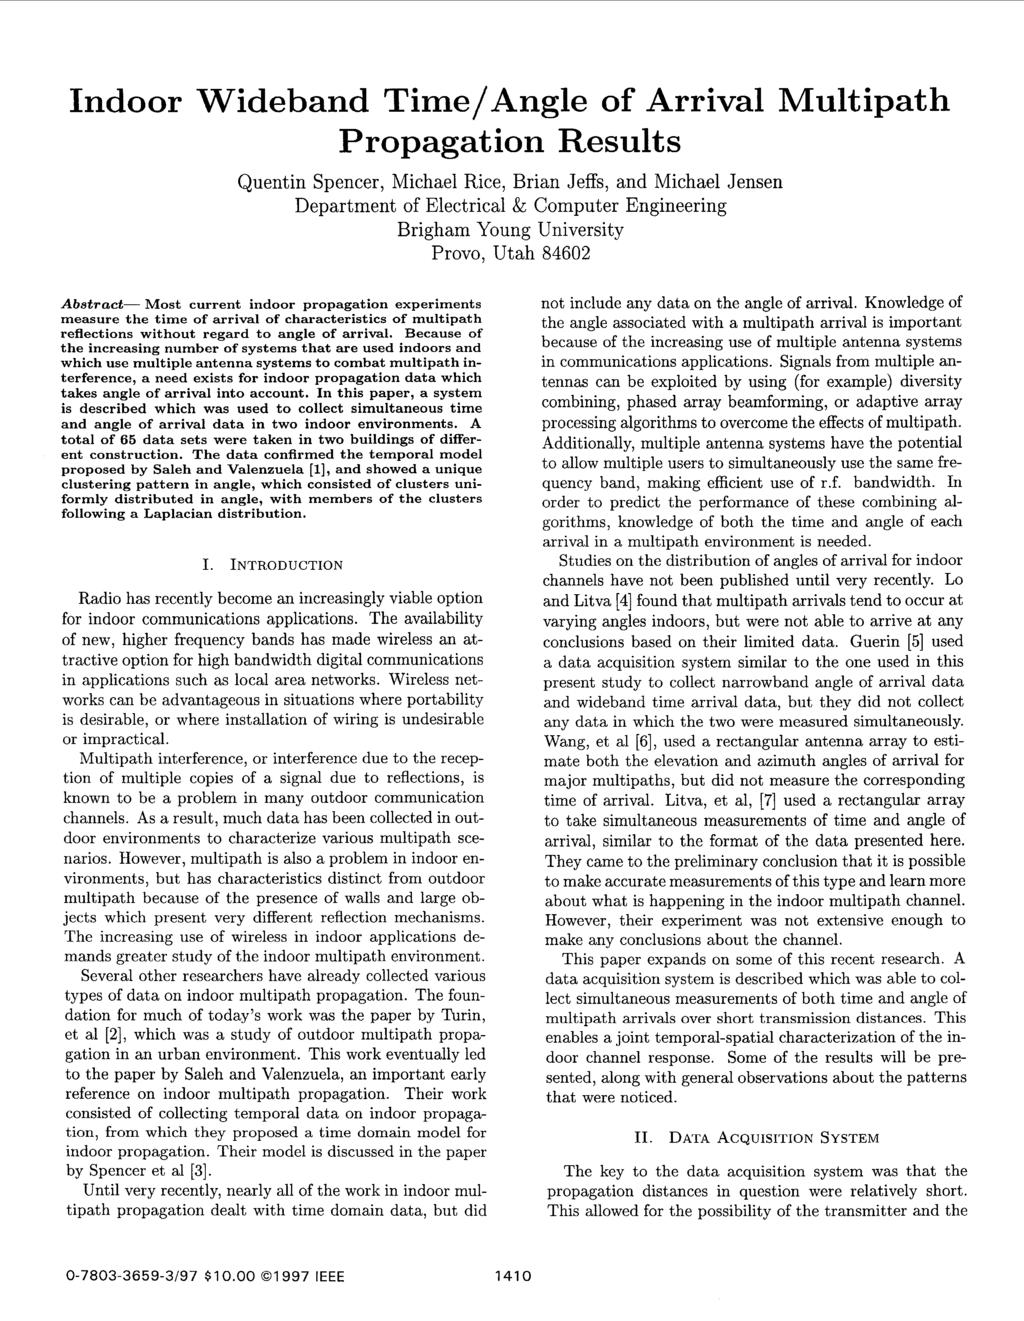 Indoor Wideband Time/Angle of Arrival Multipath Propagation Results Quentin Spencer, Michael Rice, Brian Jeffs, and Michael Jensen Department of Electrical 8~ Computer Engineering Brigham Young